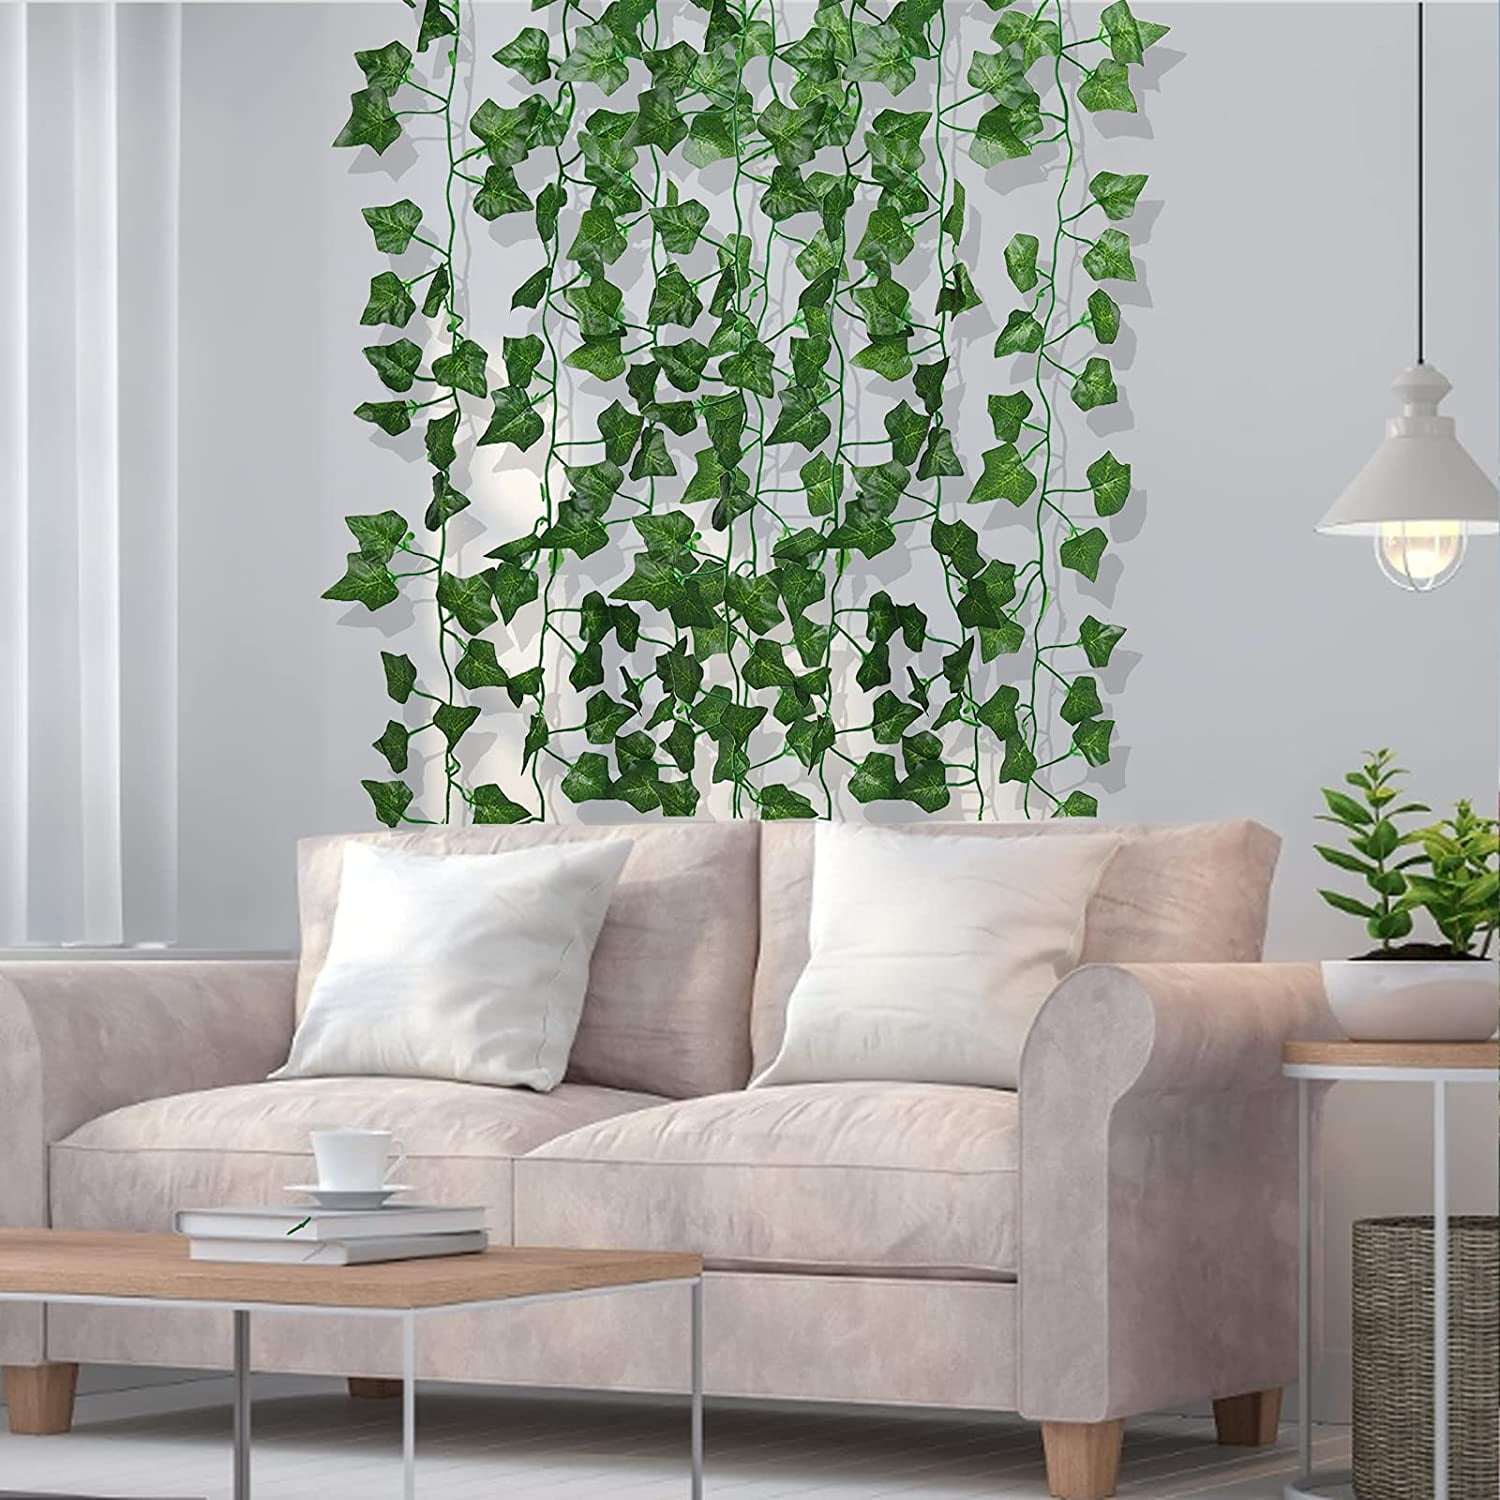 12 Pack Fake Vines for Room Decor with 100 LED String Light Artificial Ivy  Garland Hanging Plants Faux Greenery Leaves Bedroom Aesthetic Decor for  Home Garden Wall Wedding 12pcs With 100le 